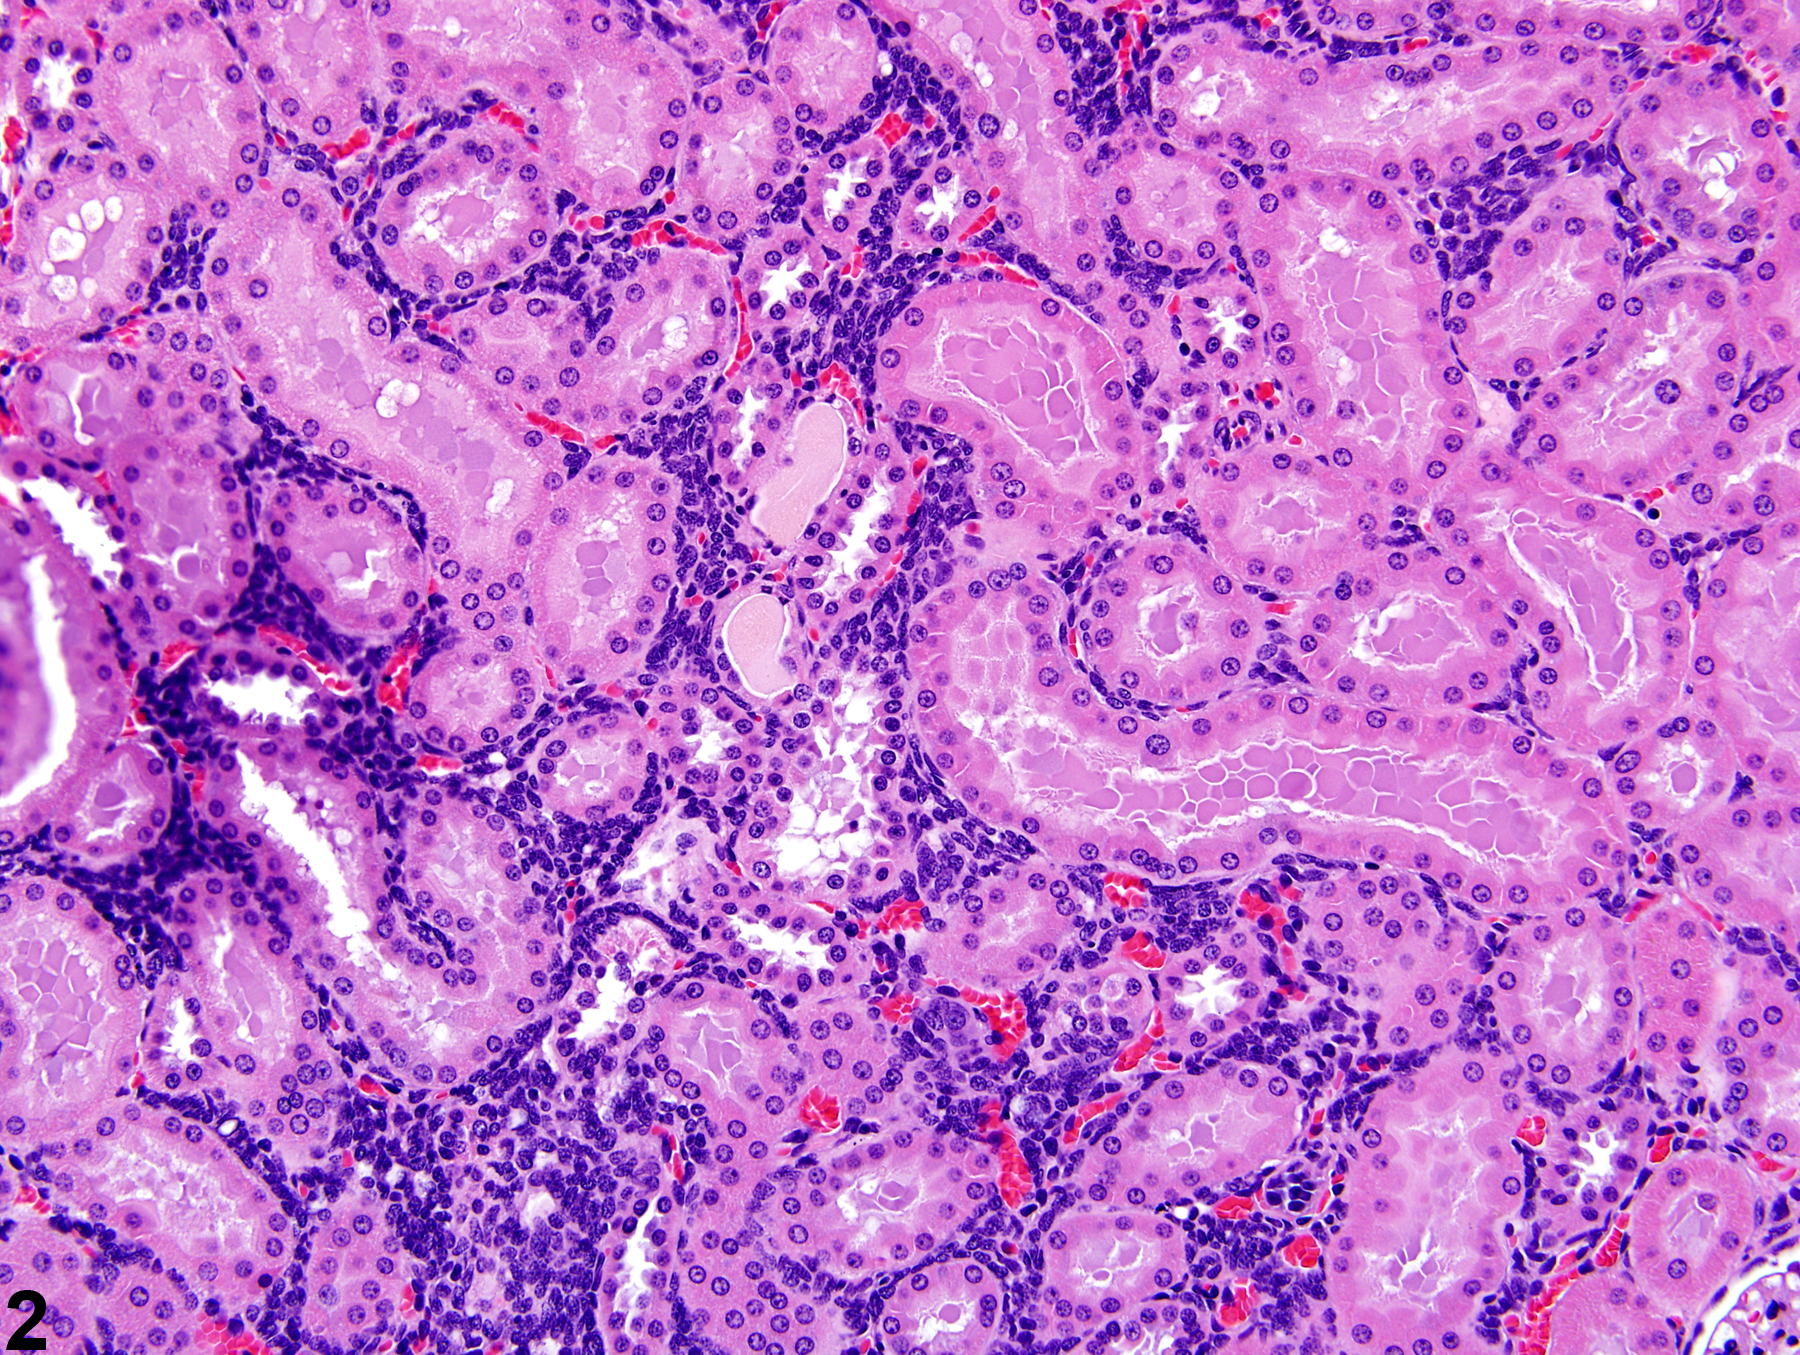 Image of nephroblastematosis in the kidney from a female Harlan Sprague-Dawley rat in a subchronic study